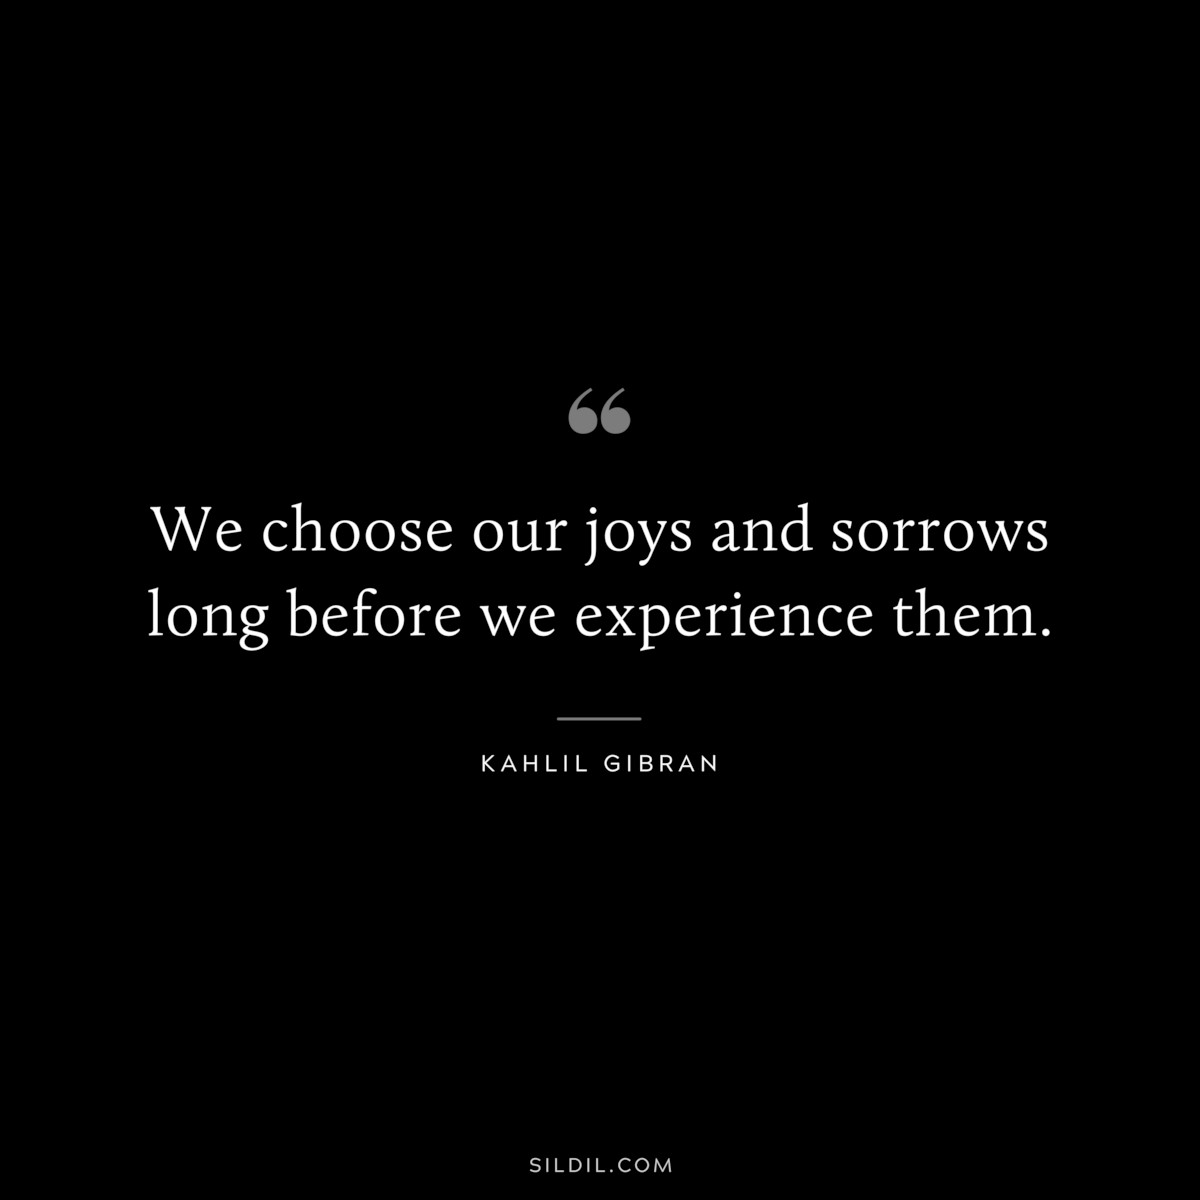 We choose our joys and sorrows long before we experience them. ― Kahlil Gibran